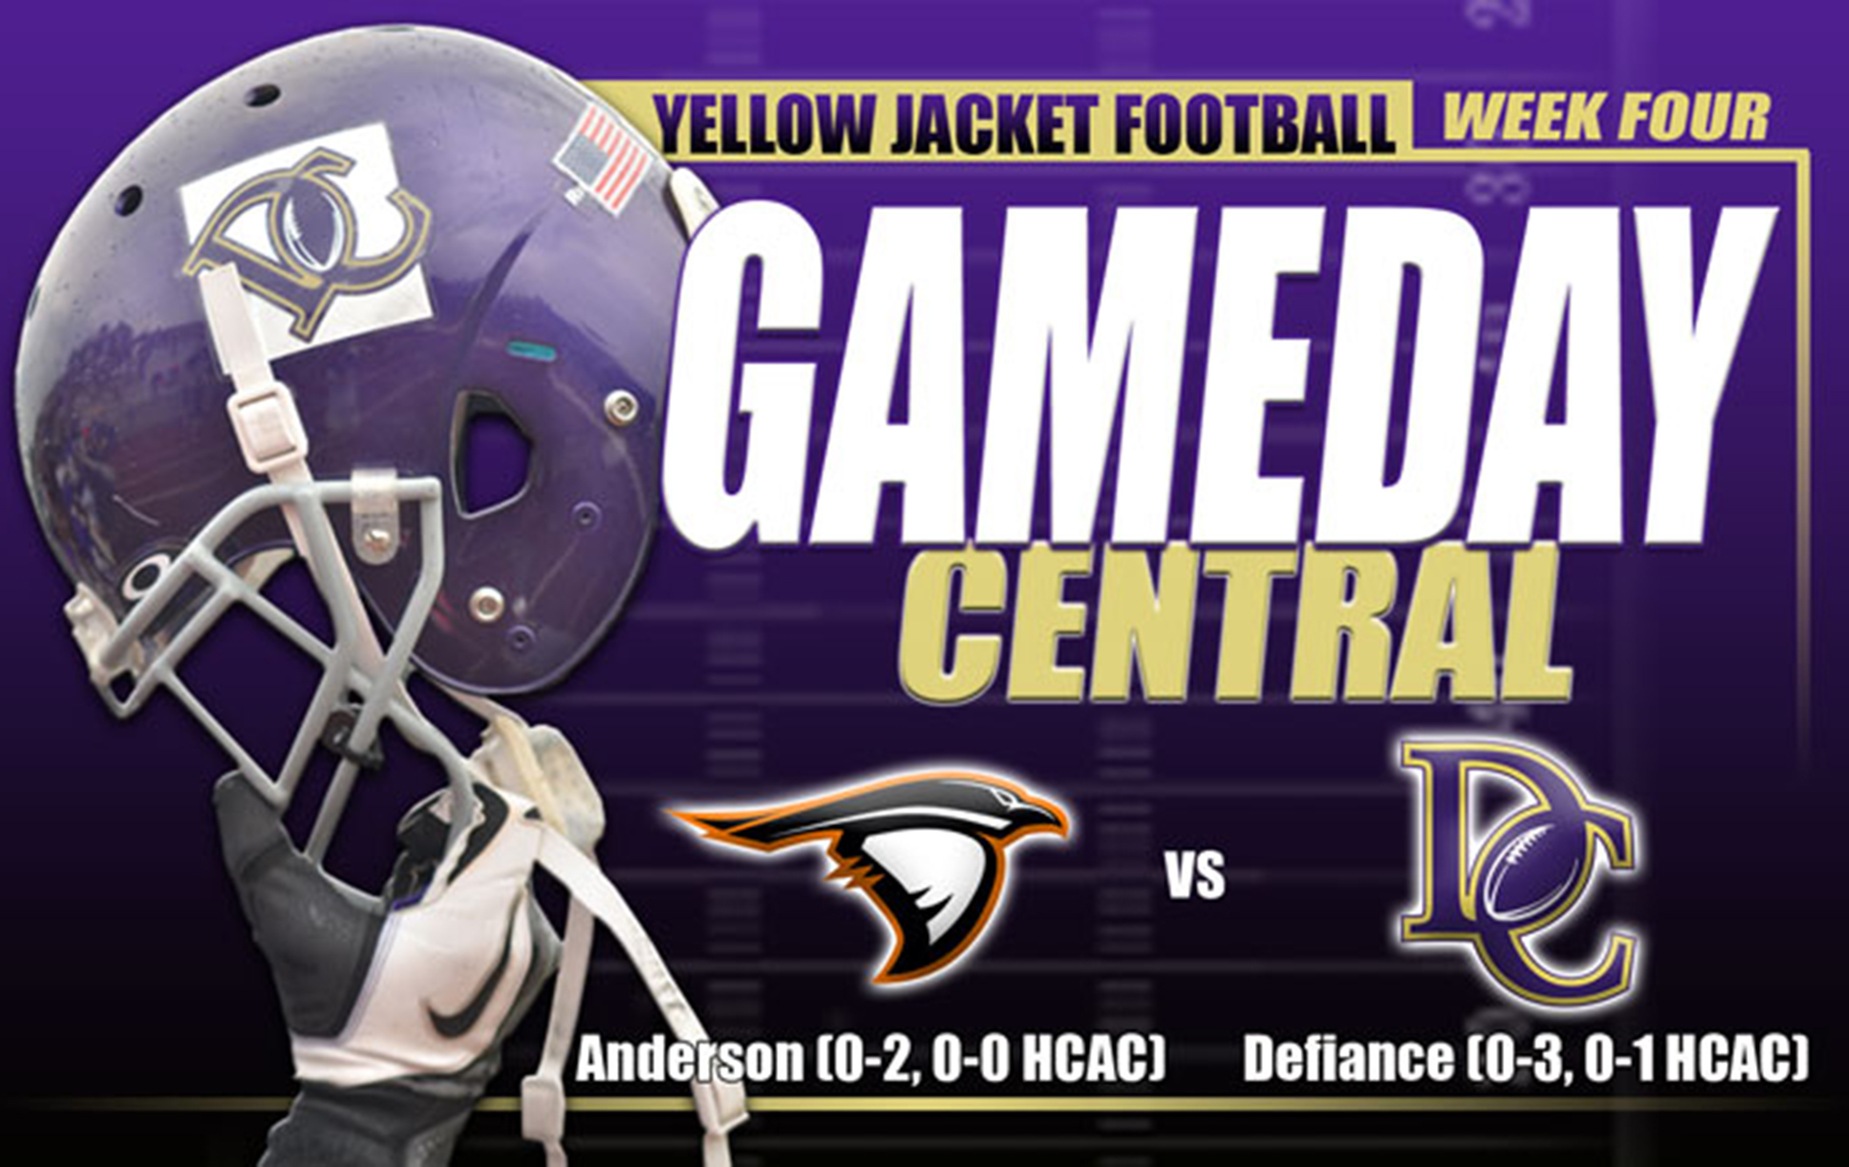 GAMEDAY CENTRAL - Defiance vs Anderson - Game Four